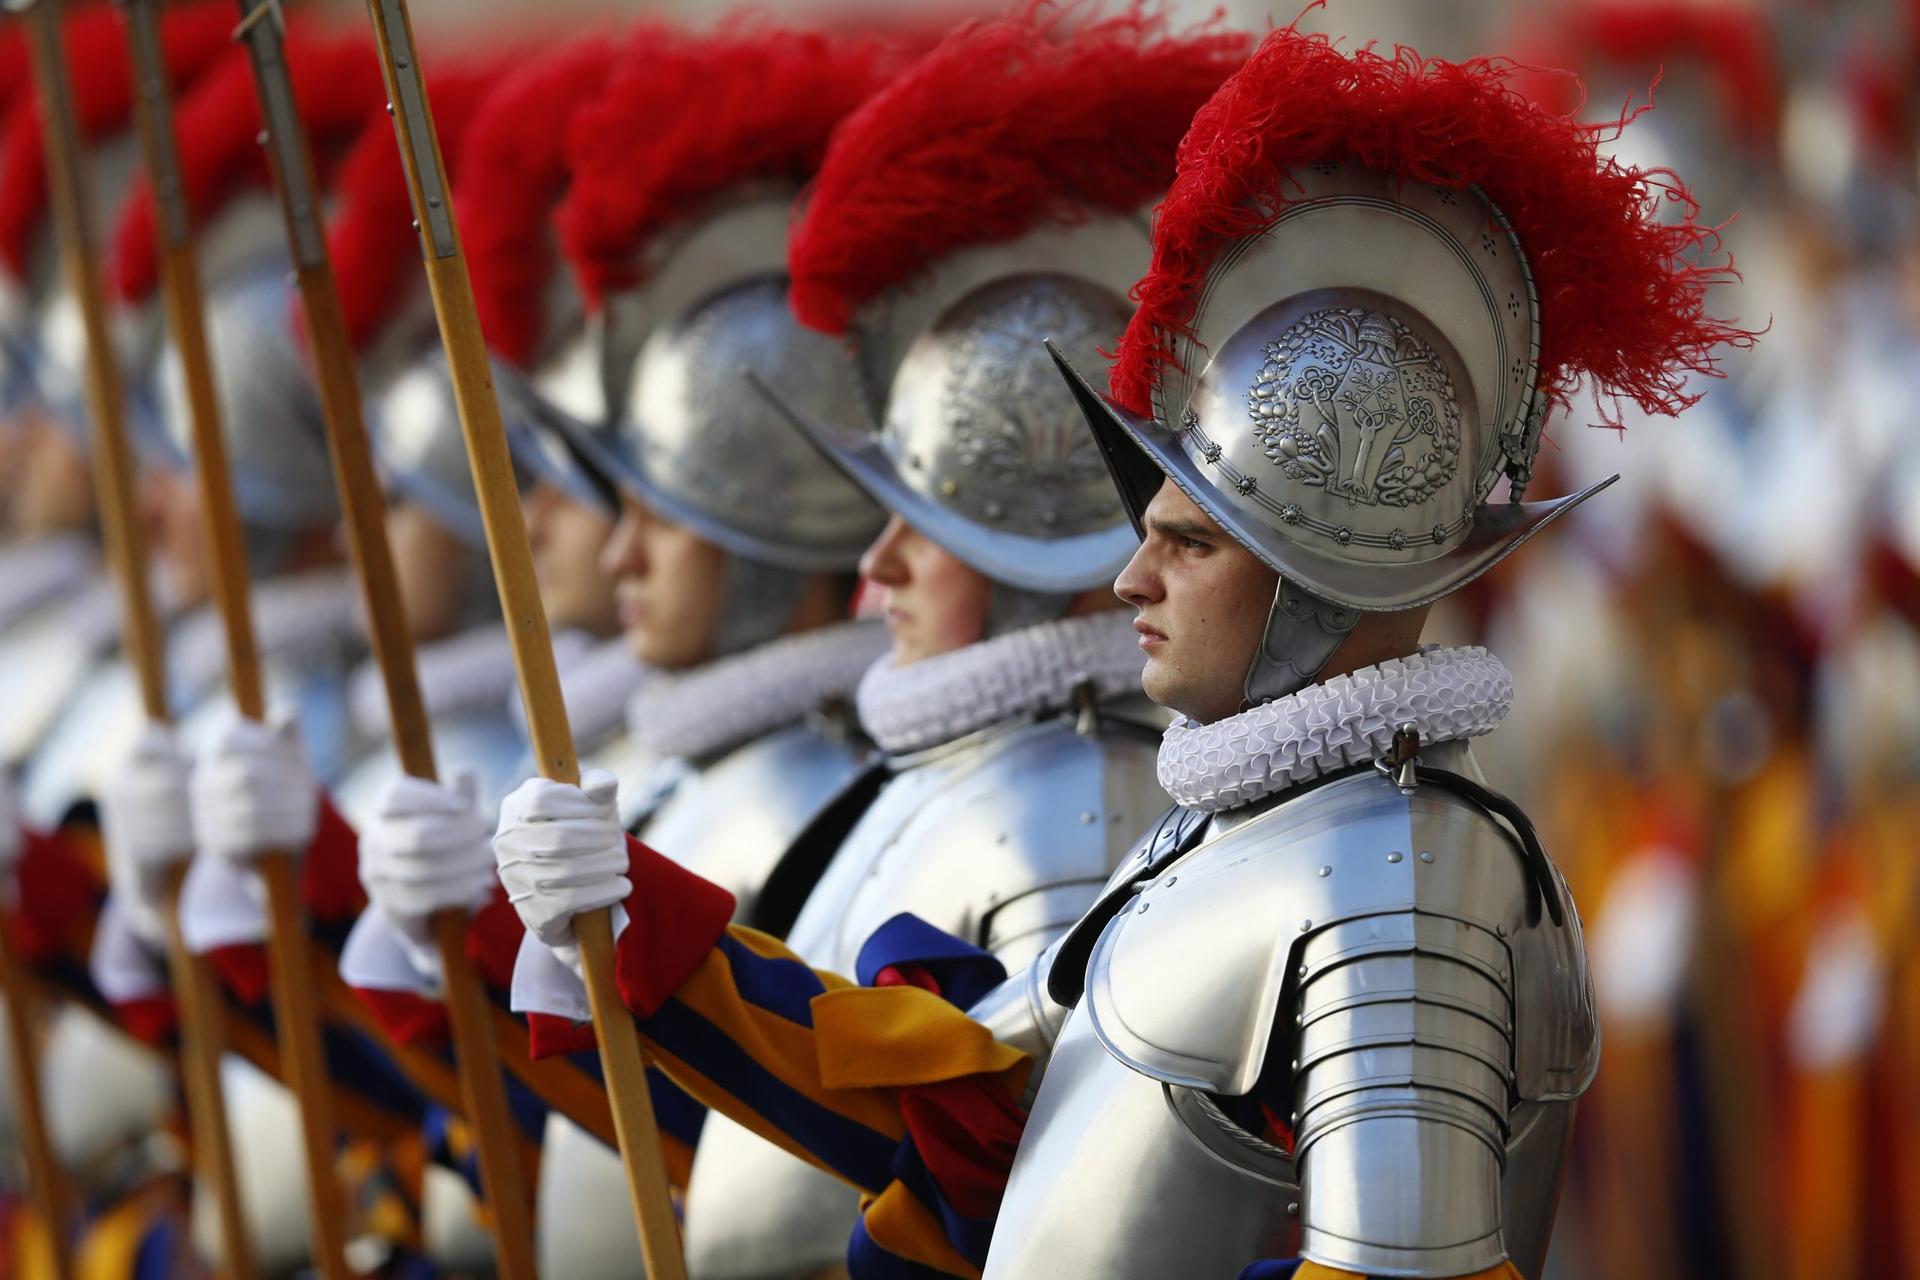 Pope tells new Swiss Guards they represent a church that welcomes